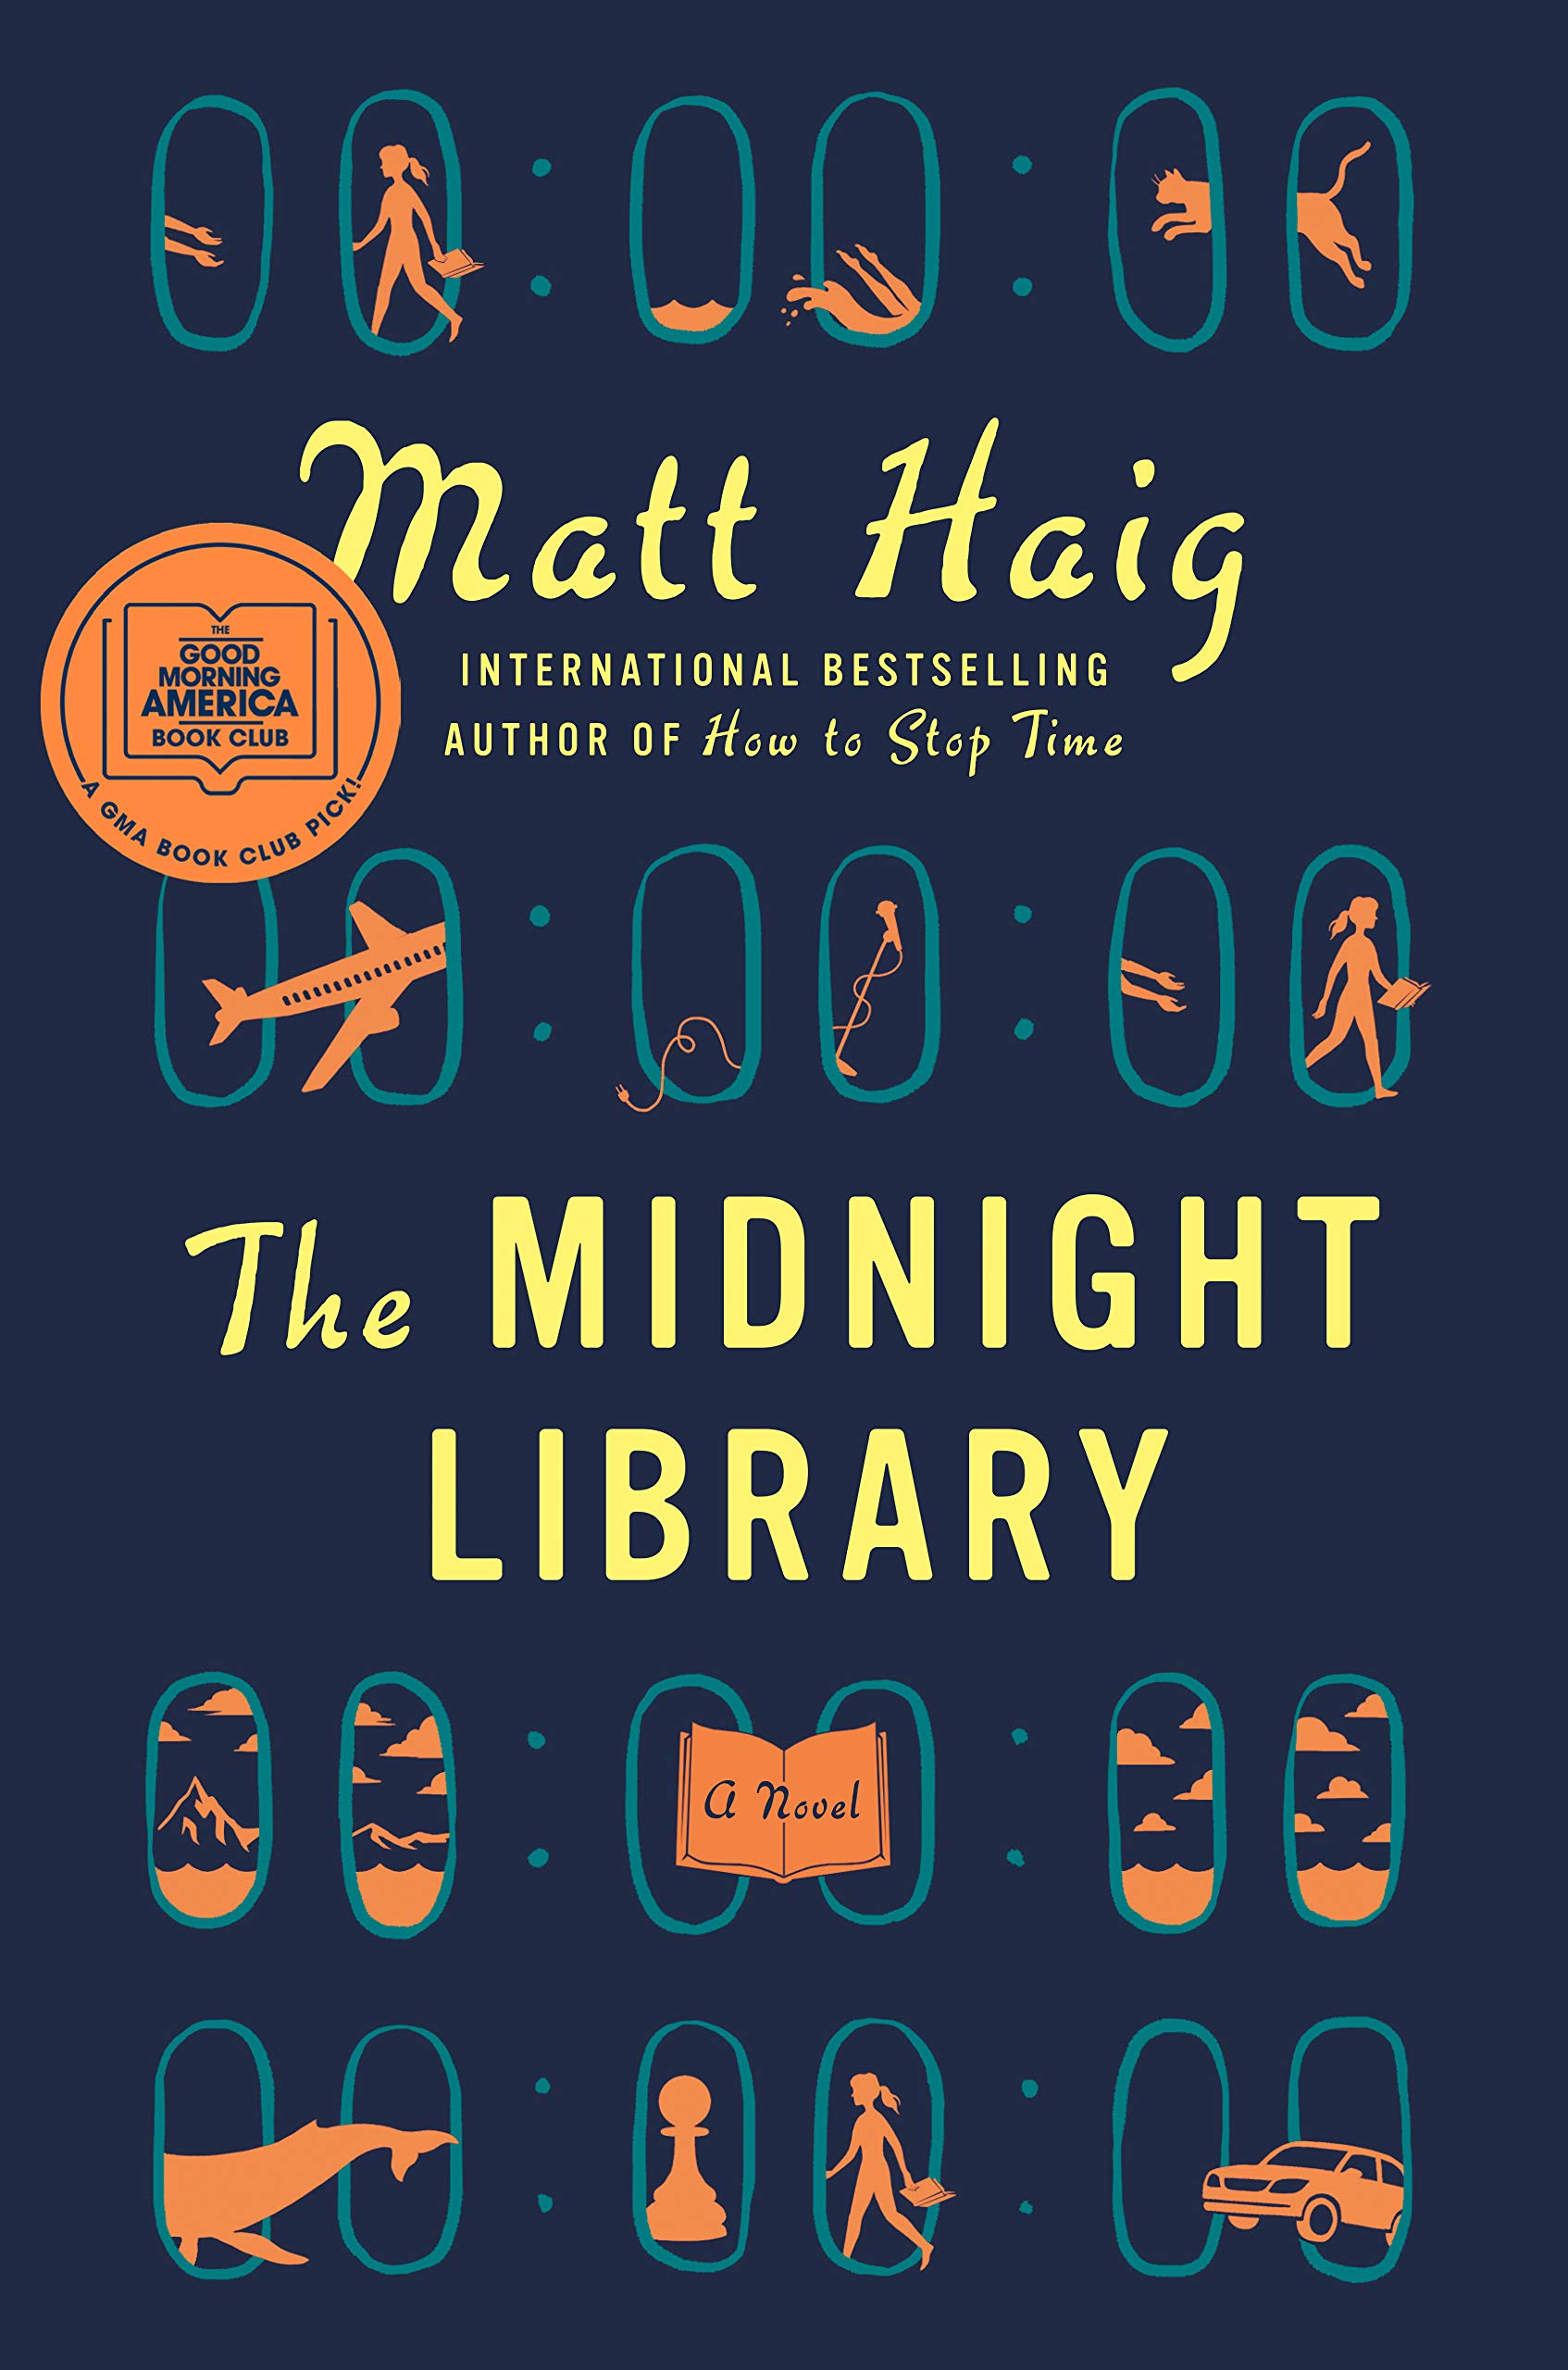 Midnight Library book cover